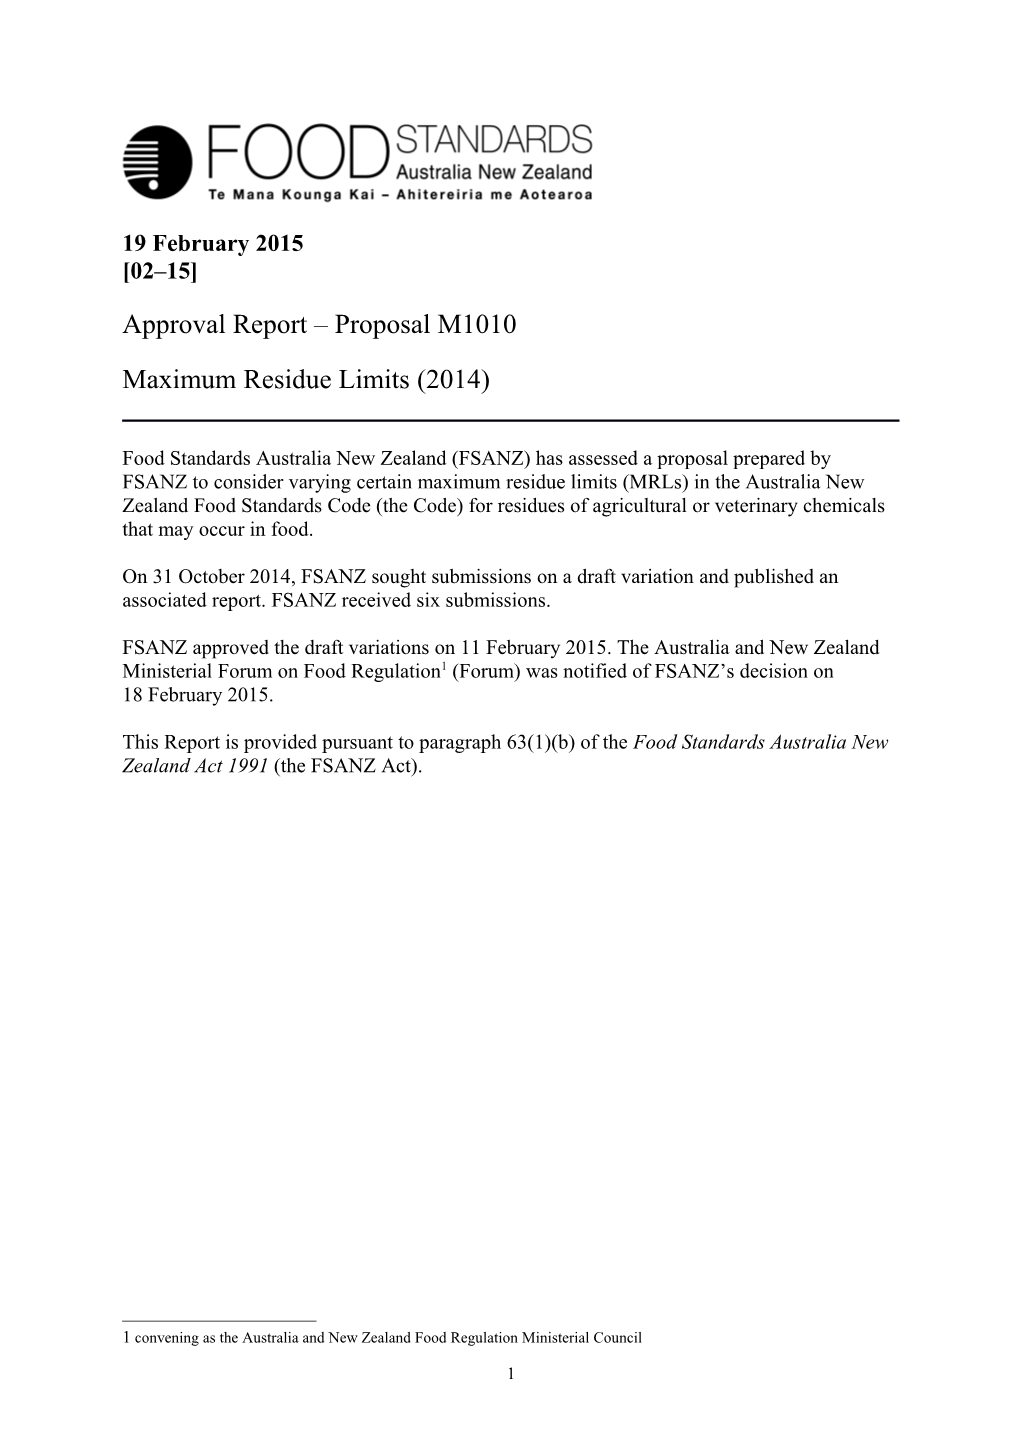 Approval Report Proposal M1010